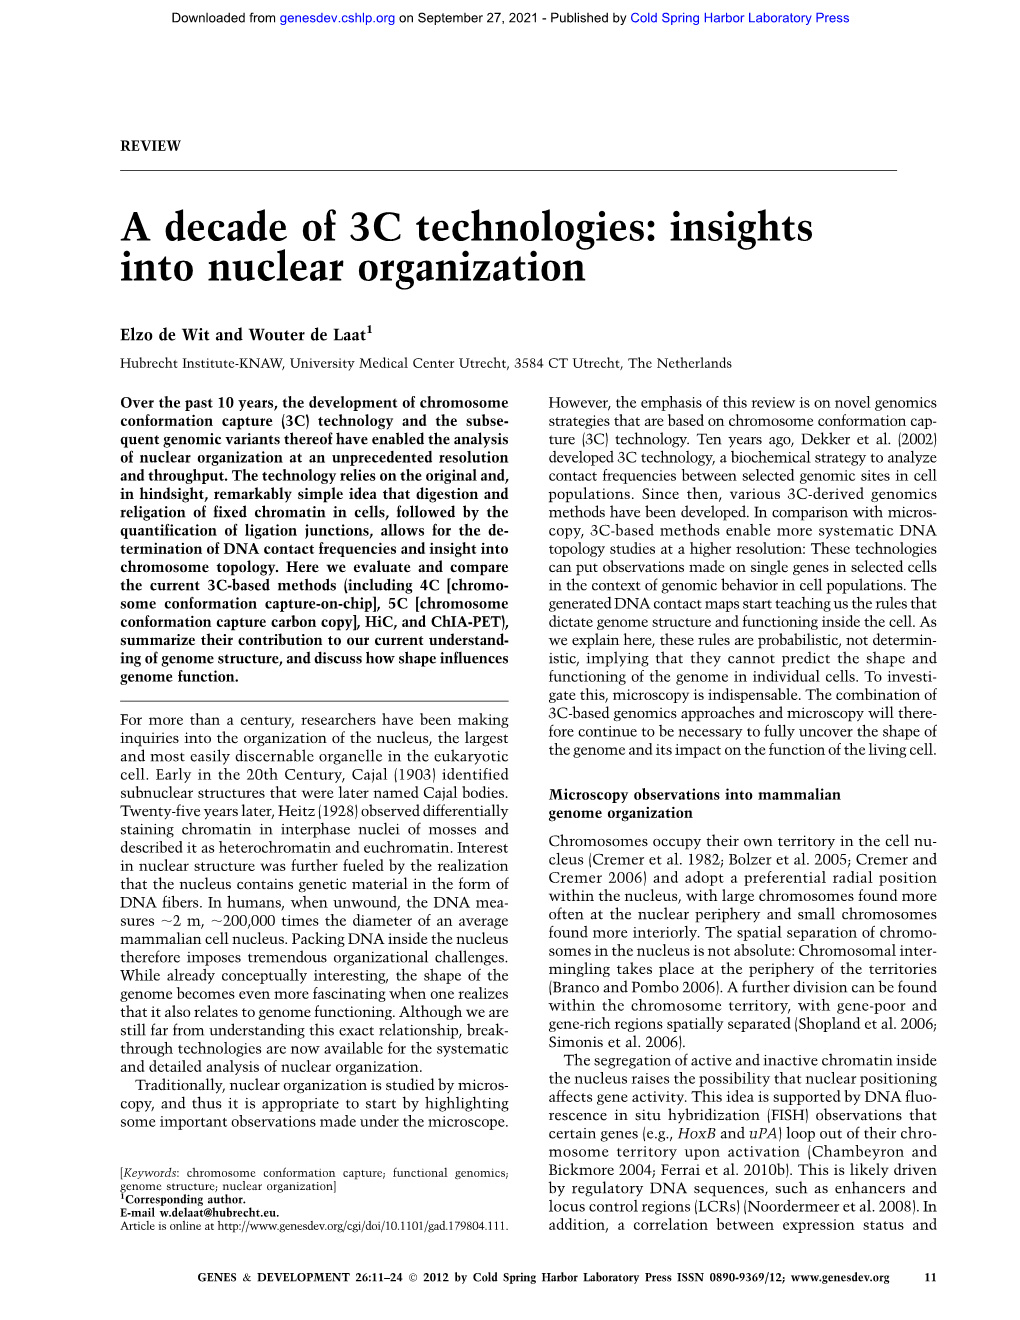 A Decade of 3C Technologies: Insights Into Nuclear Organization